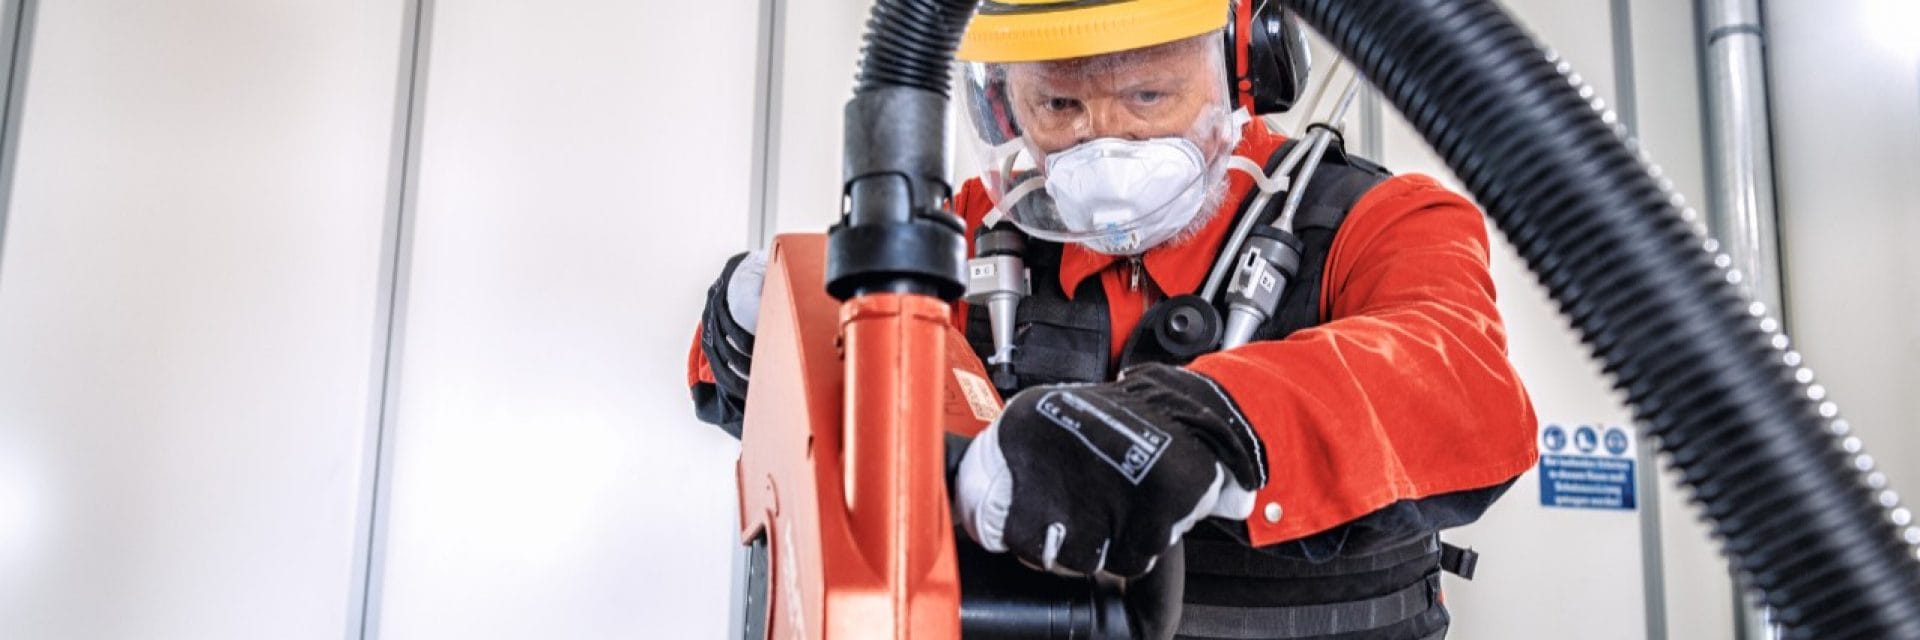 Hilti Dust Expert testing cutting tools at the Dust Research Center in Germany